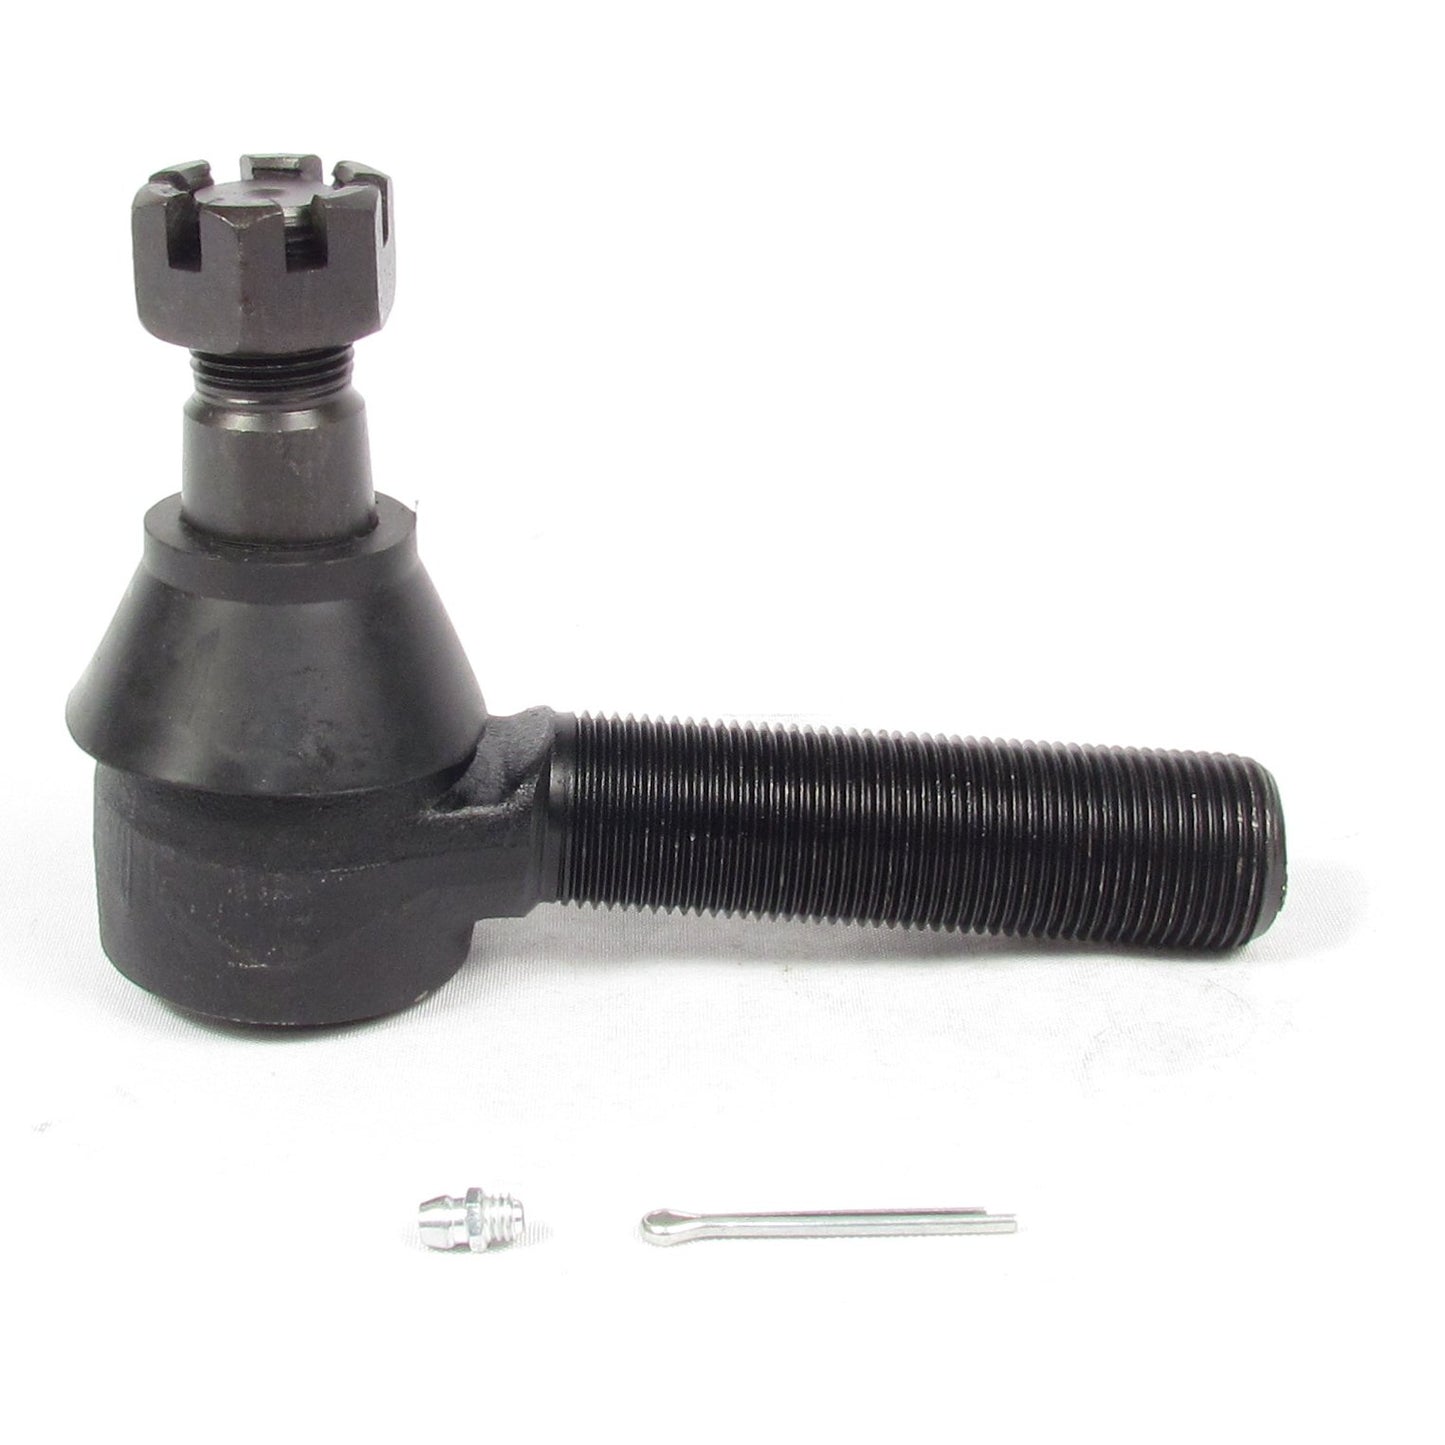 Fortpro Tie Rod End Compatible with Mack, International | Replaces R230068-Left Side/R230069-Right Side | F265858-F265859